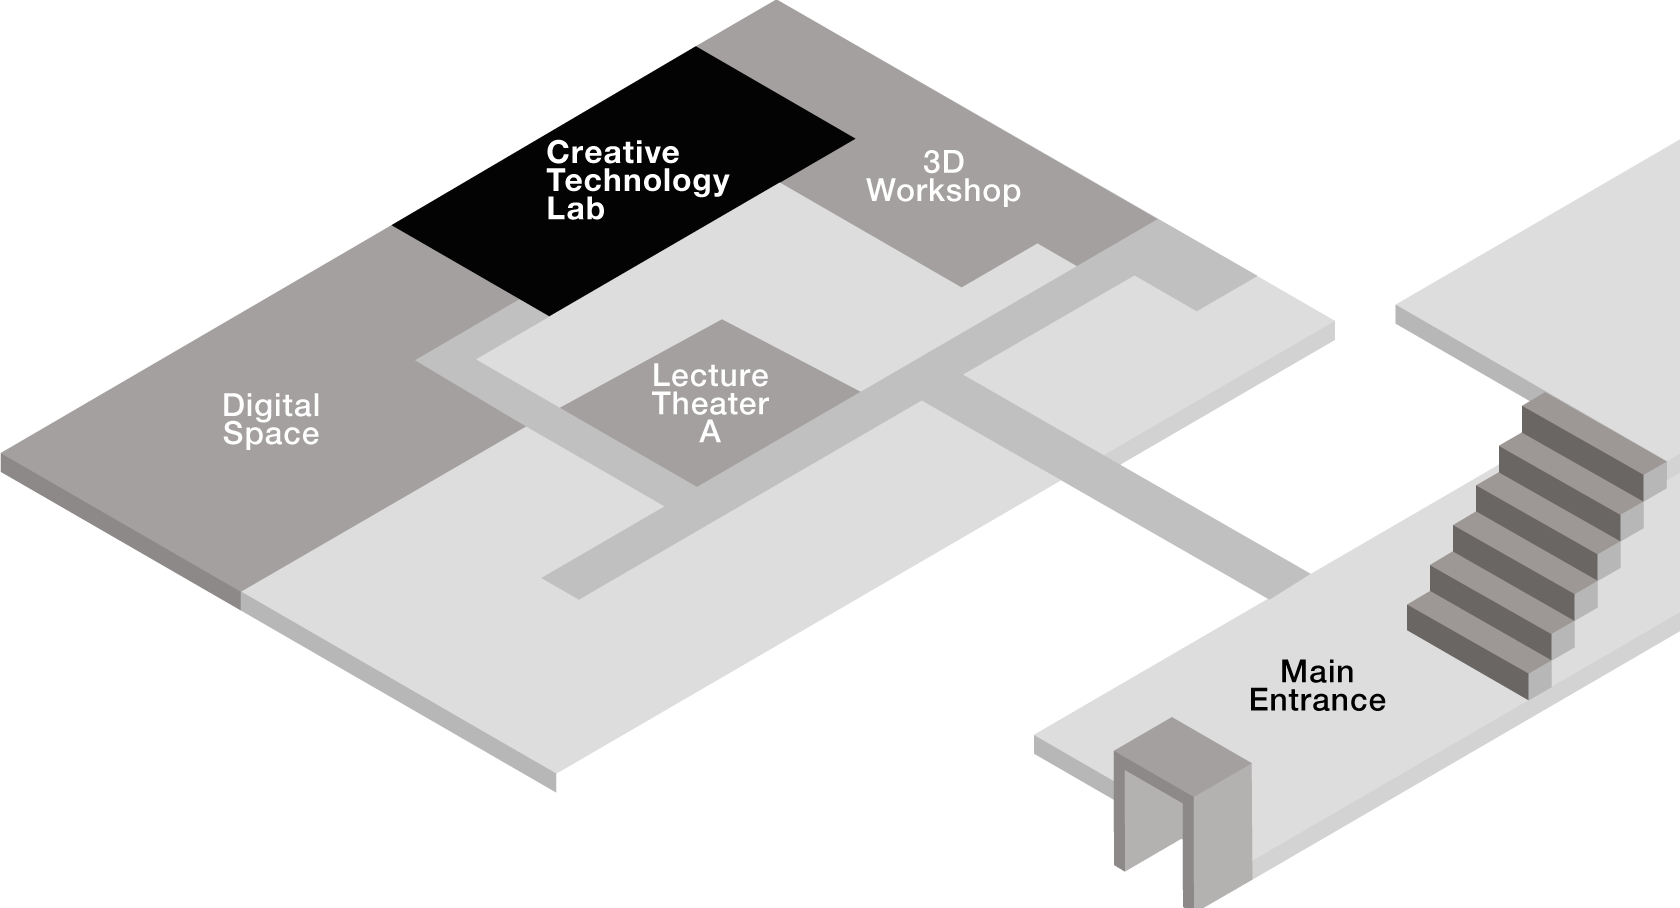 Map showing the location of the Creative Technology Lab within London College of Communication